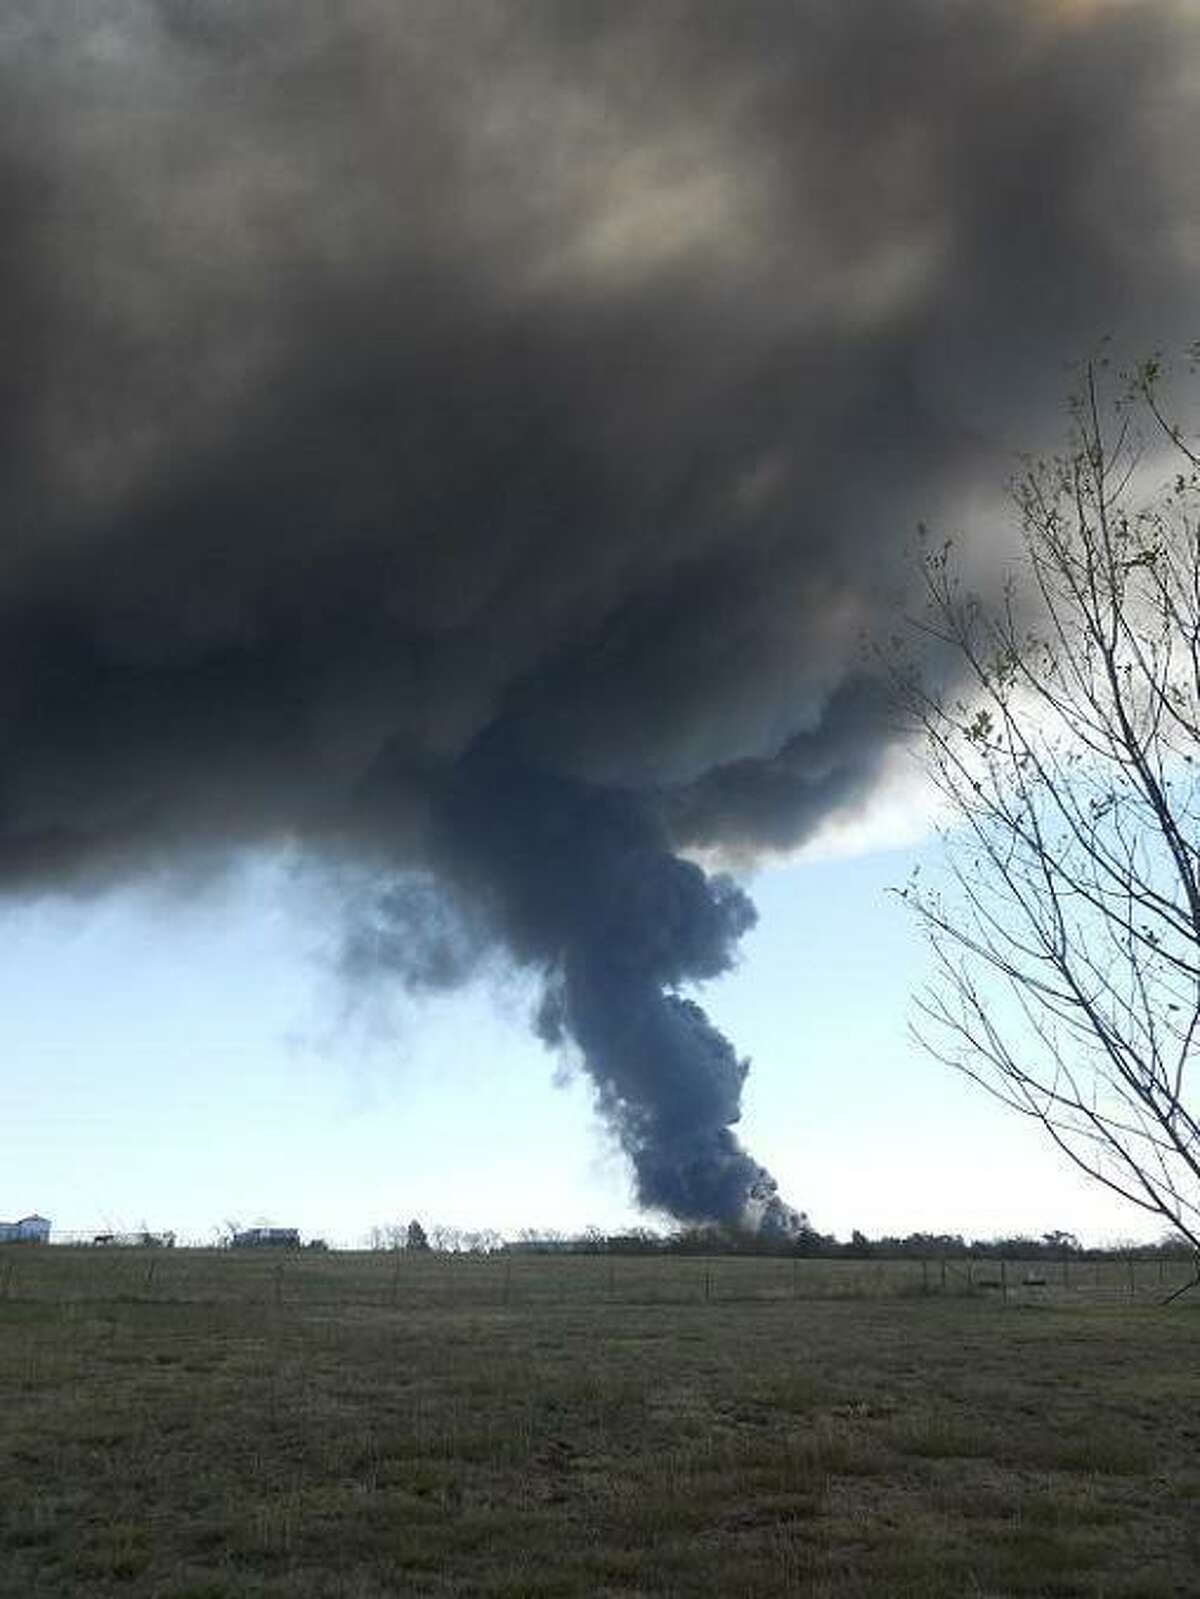 Three miles from fire at chemical plant south of Dallas, Texas. Photo taken from Dallas News blog The Scoop. Submitted to The Scoop by John Granatino, retired Dallas Morning news executive. He Lives 3 miles from the plant.